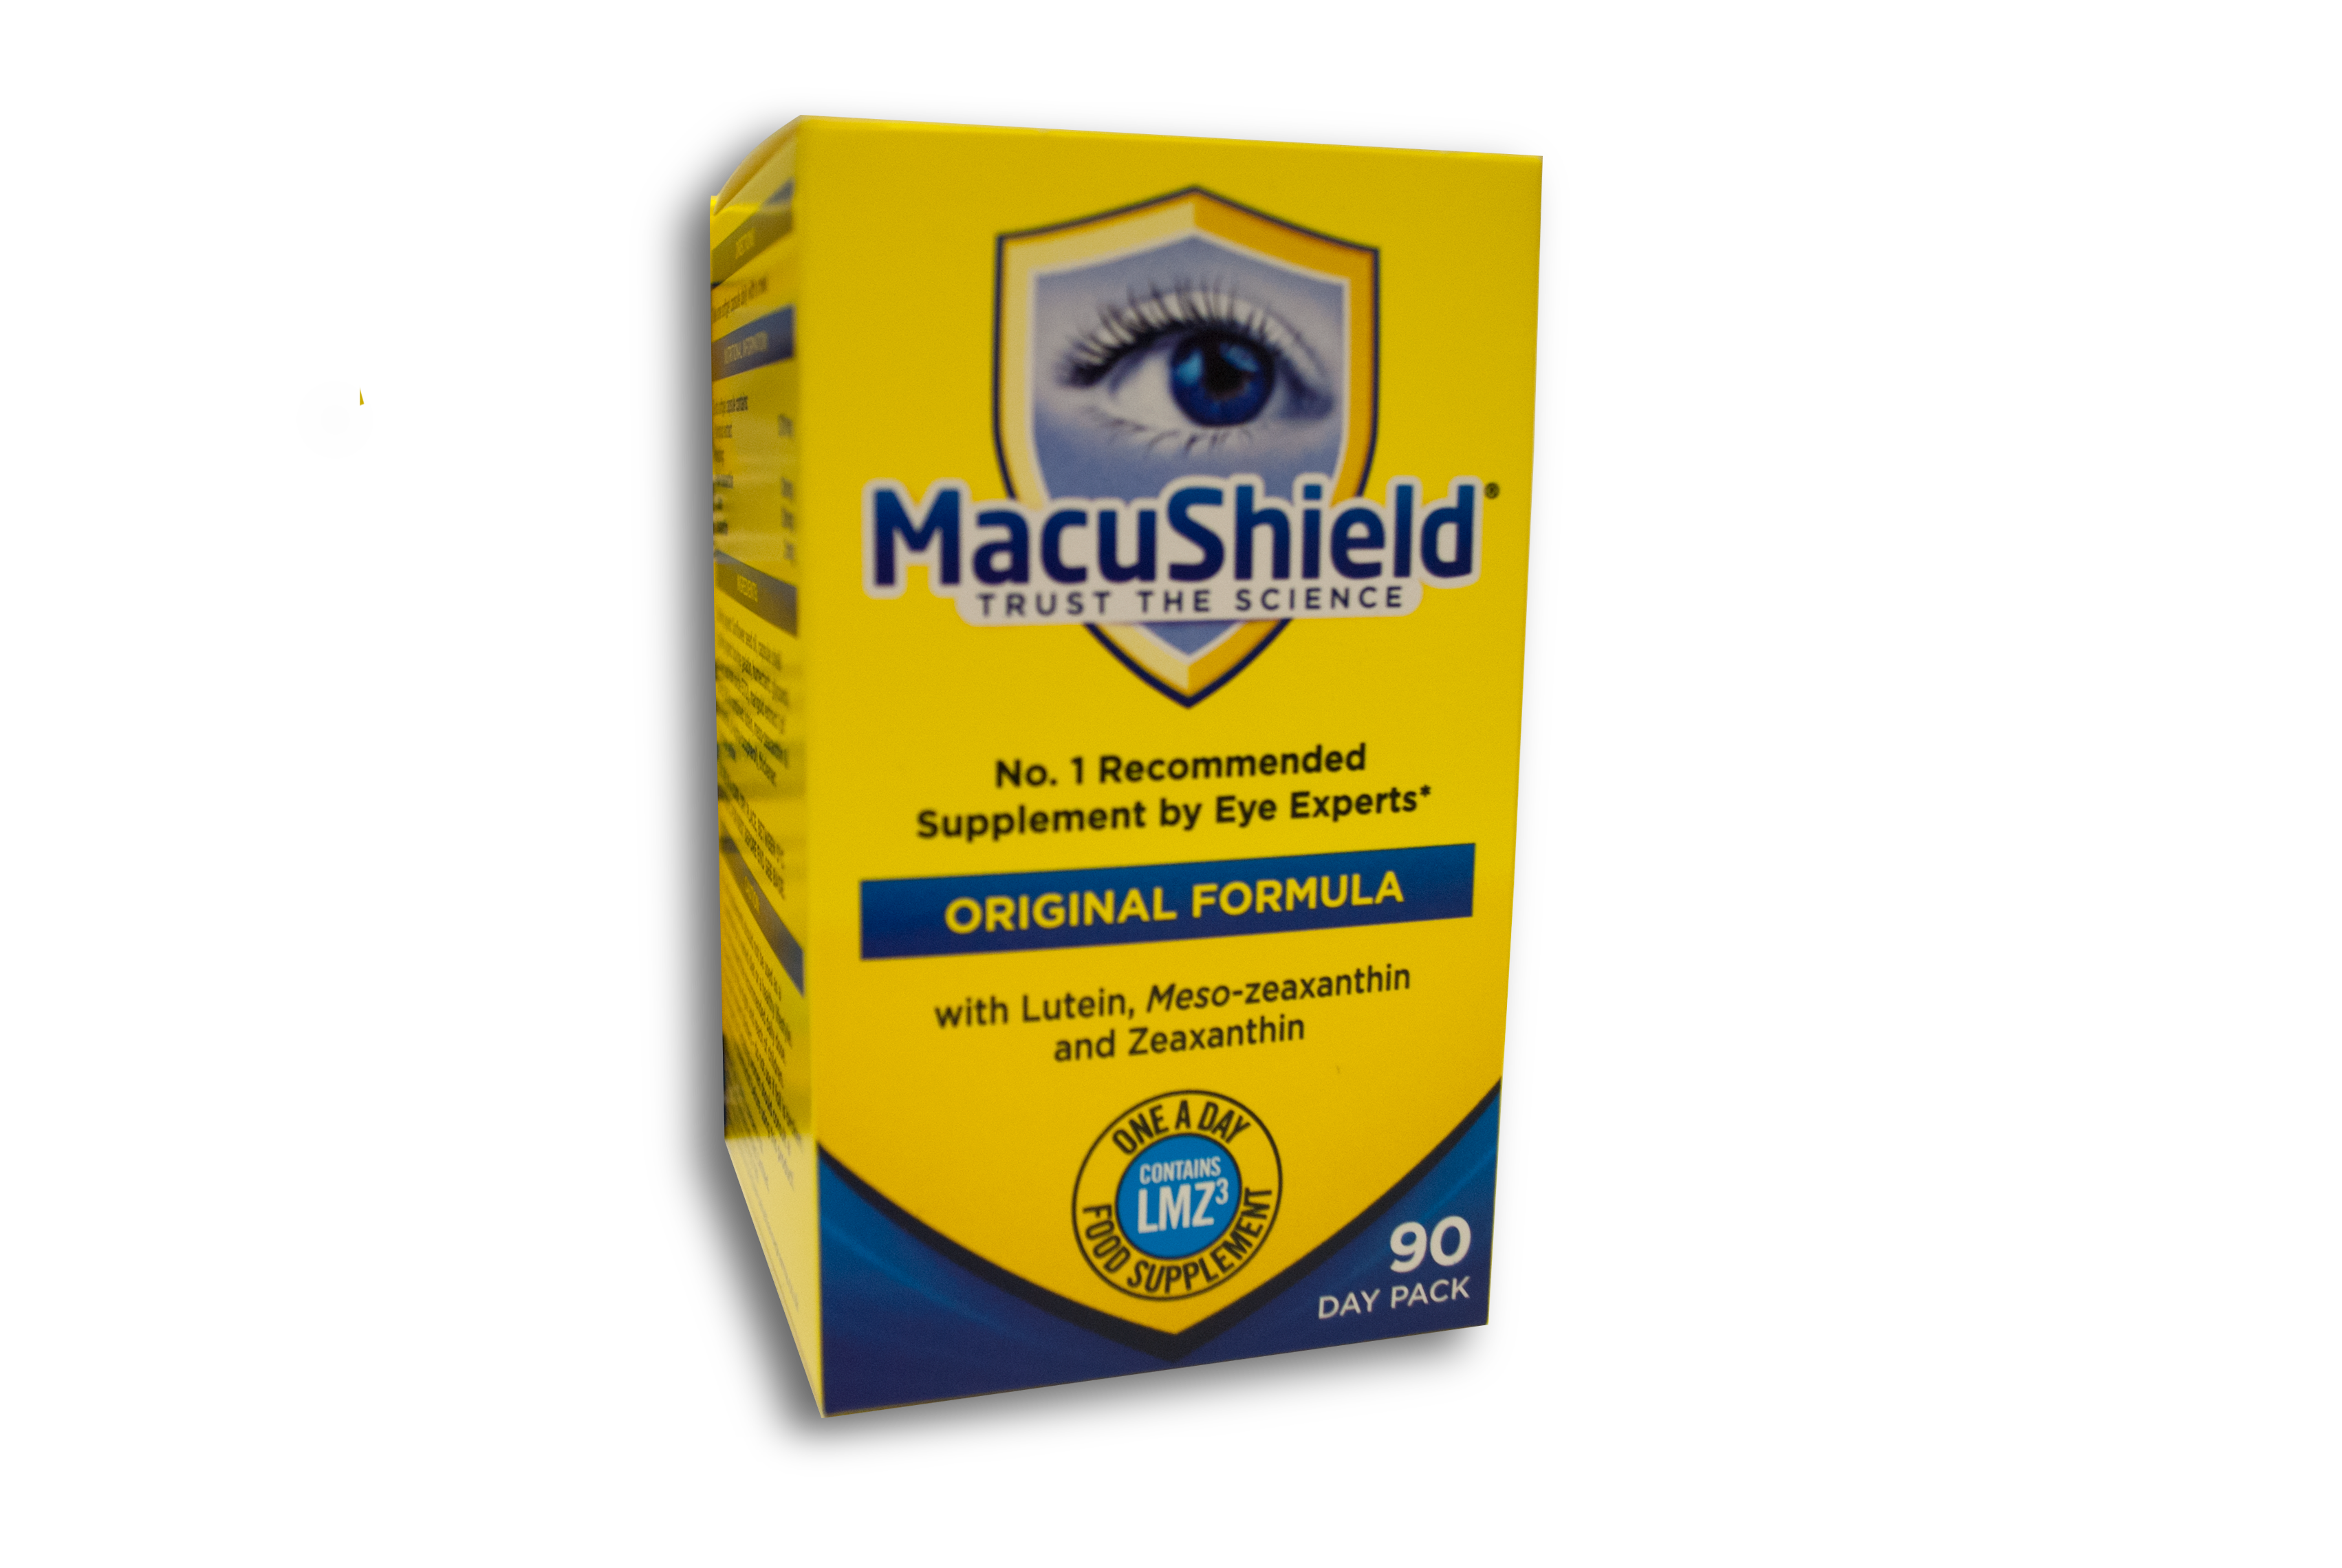 Macushield Capsules Pack of 90 capsules (1, 2, 3, 4 ,6 and 10 pack) - Medipharm Online - Cheap Online Pharmacy Dublin Ireland Europe Best Price